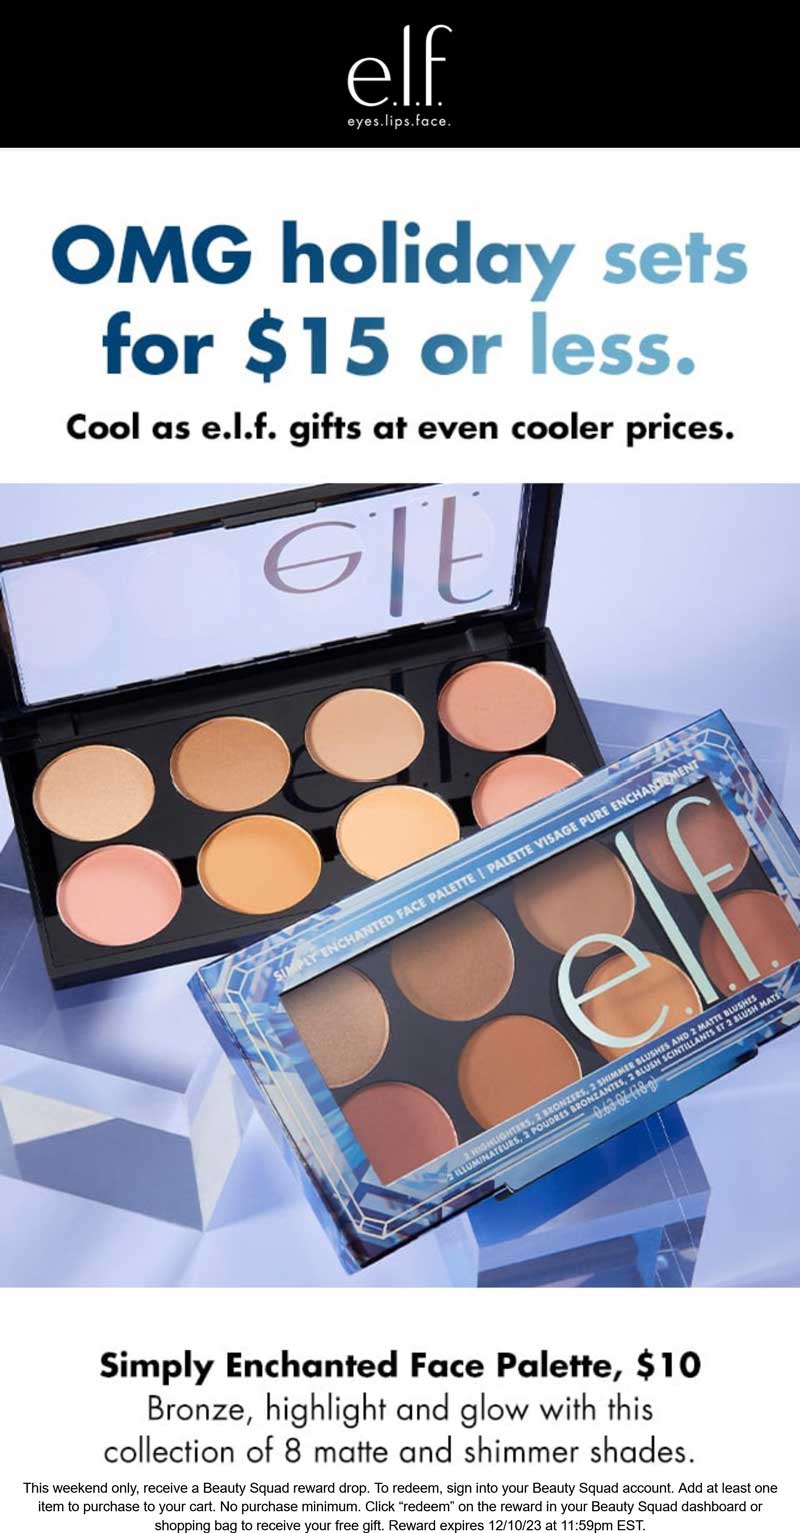 Holiday sets = $15 or less today at e.l.f. Cosmetics #elfcosmetics